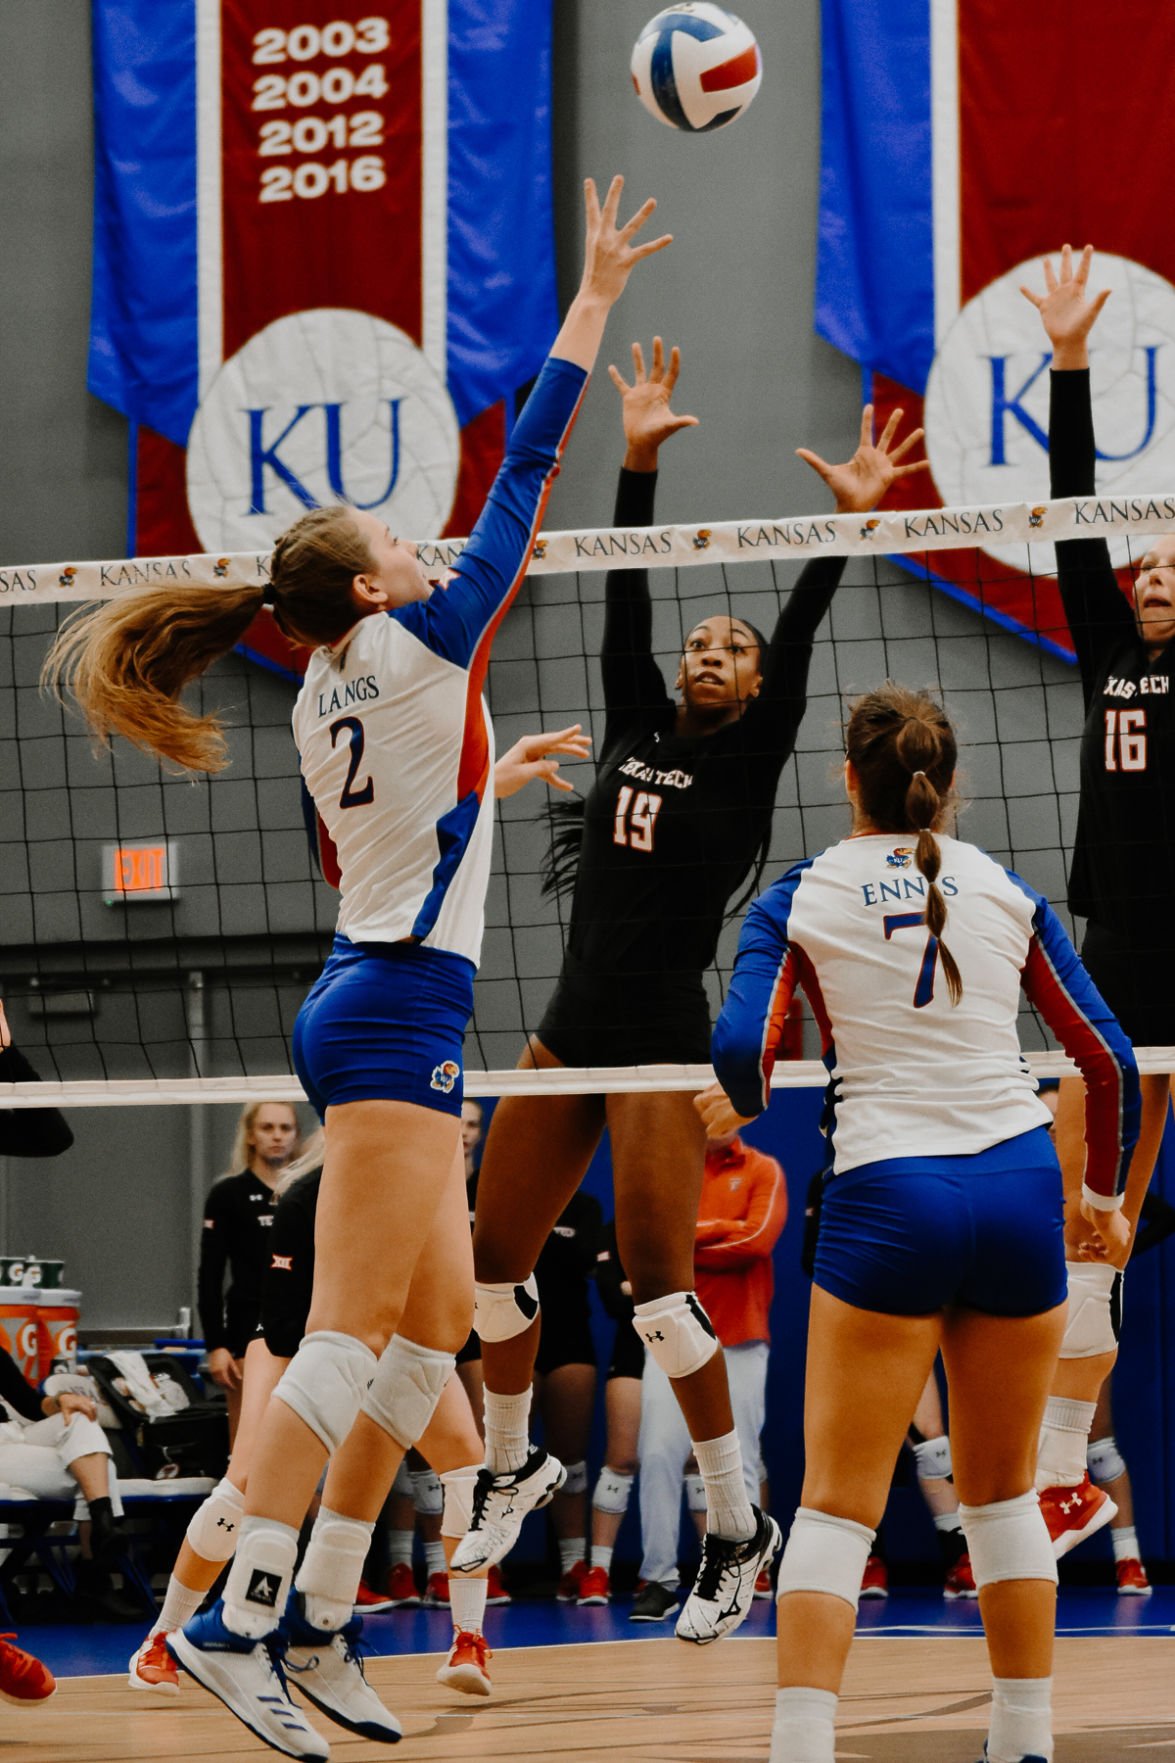 Front row presence powers Kansas volleyball in 3-0 victory over Texas Tech | Sports | kansan.com